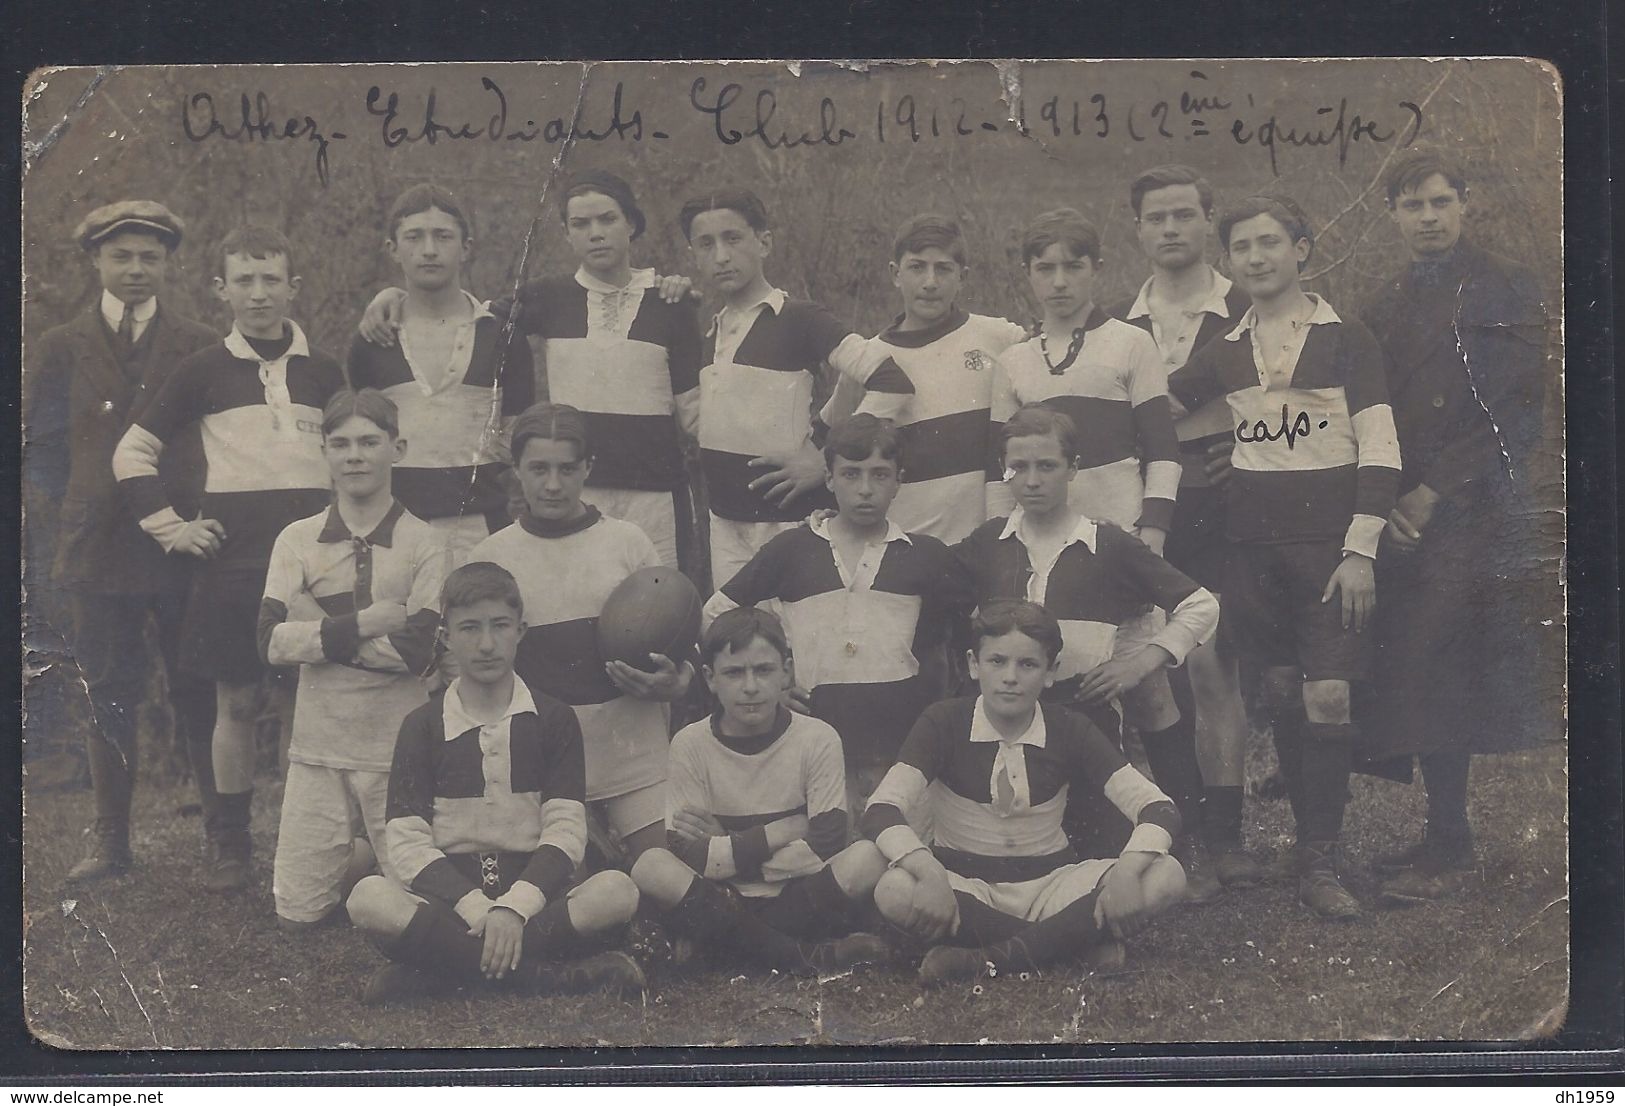 64 ORTHEZ ETUDIANTS RUGBY CLUB TEAM 1912-1913 2eme EQUIPE CAPITAINE SPORT CARTE PHOTO CPA - Orthez